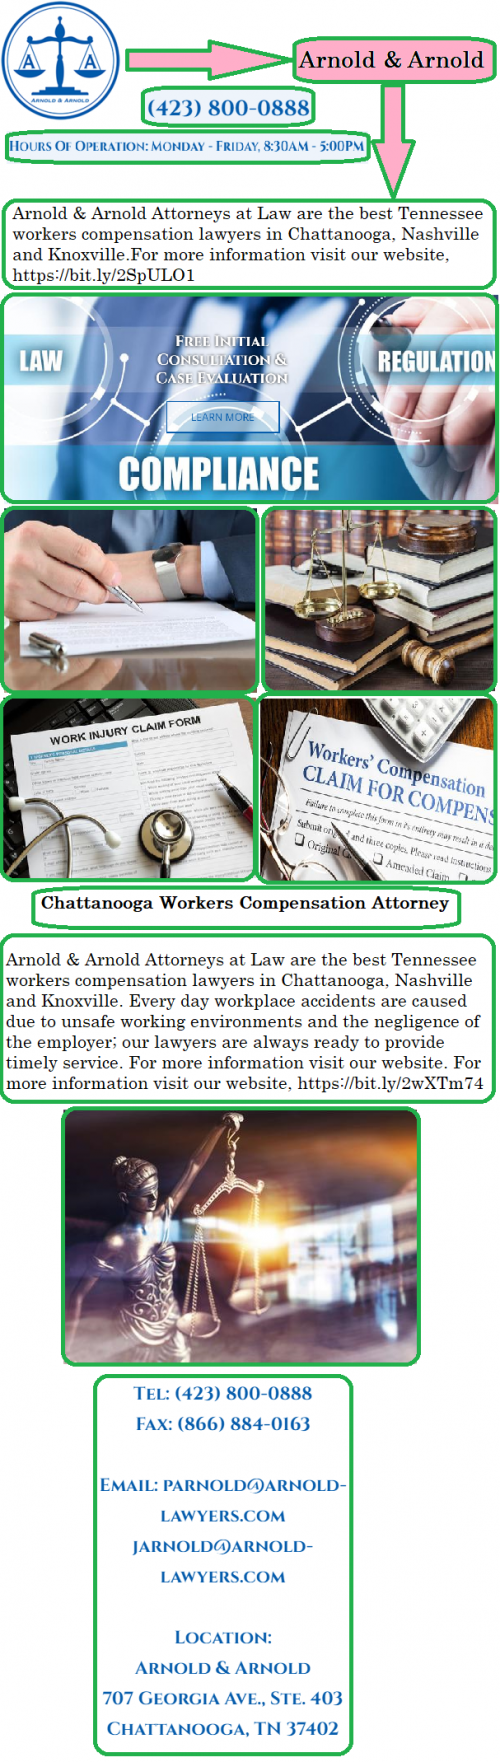 Arnold & Arnold Attorneys at Law are the best Tennessee workers compensation lawyers in Chattanooga, Nashville and Knoxville. Every day workplace accidents are caused due to unsafe working environments and the negligence of the employer; our lawyers are always ready to provide timely service. For more information visit our website. For more information visit our website,https://bit.ly/2wXTm74